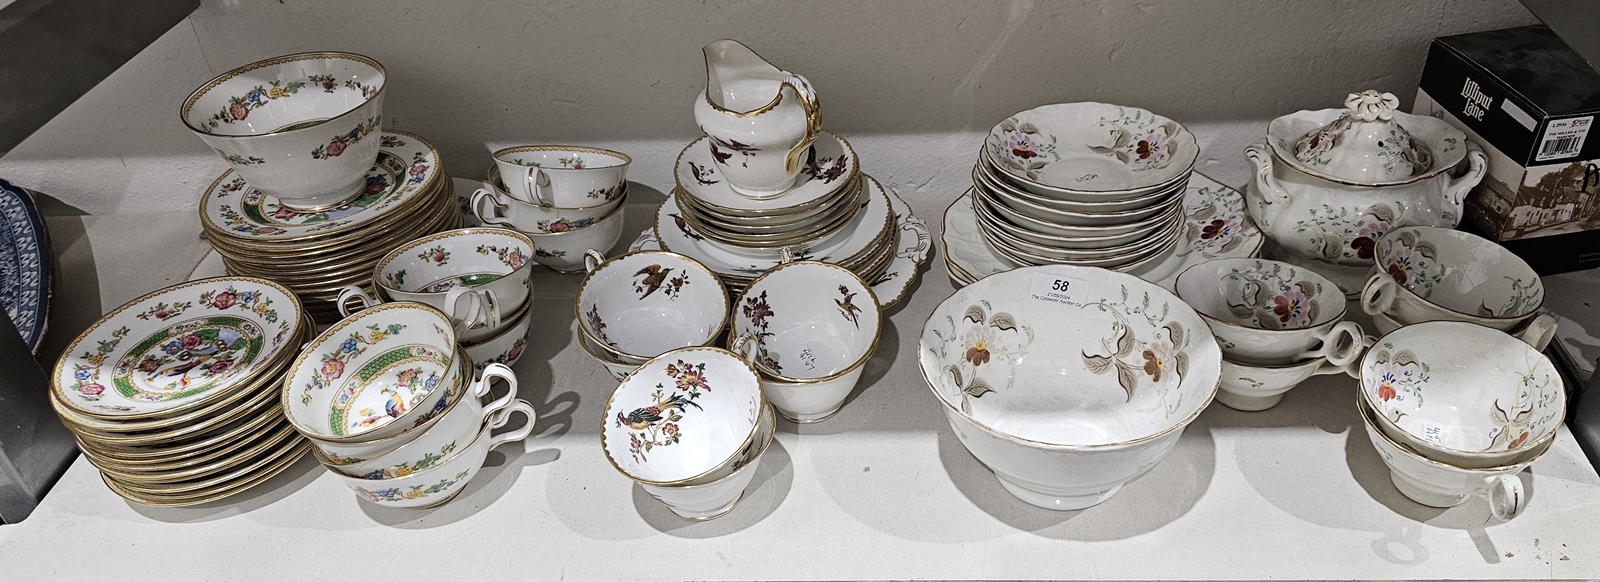 Three English porcelain and bone china part tea services comprising a New Chelsea Staffordshire - Image 4 of 6